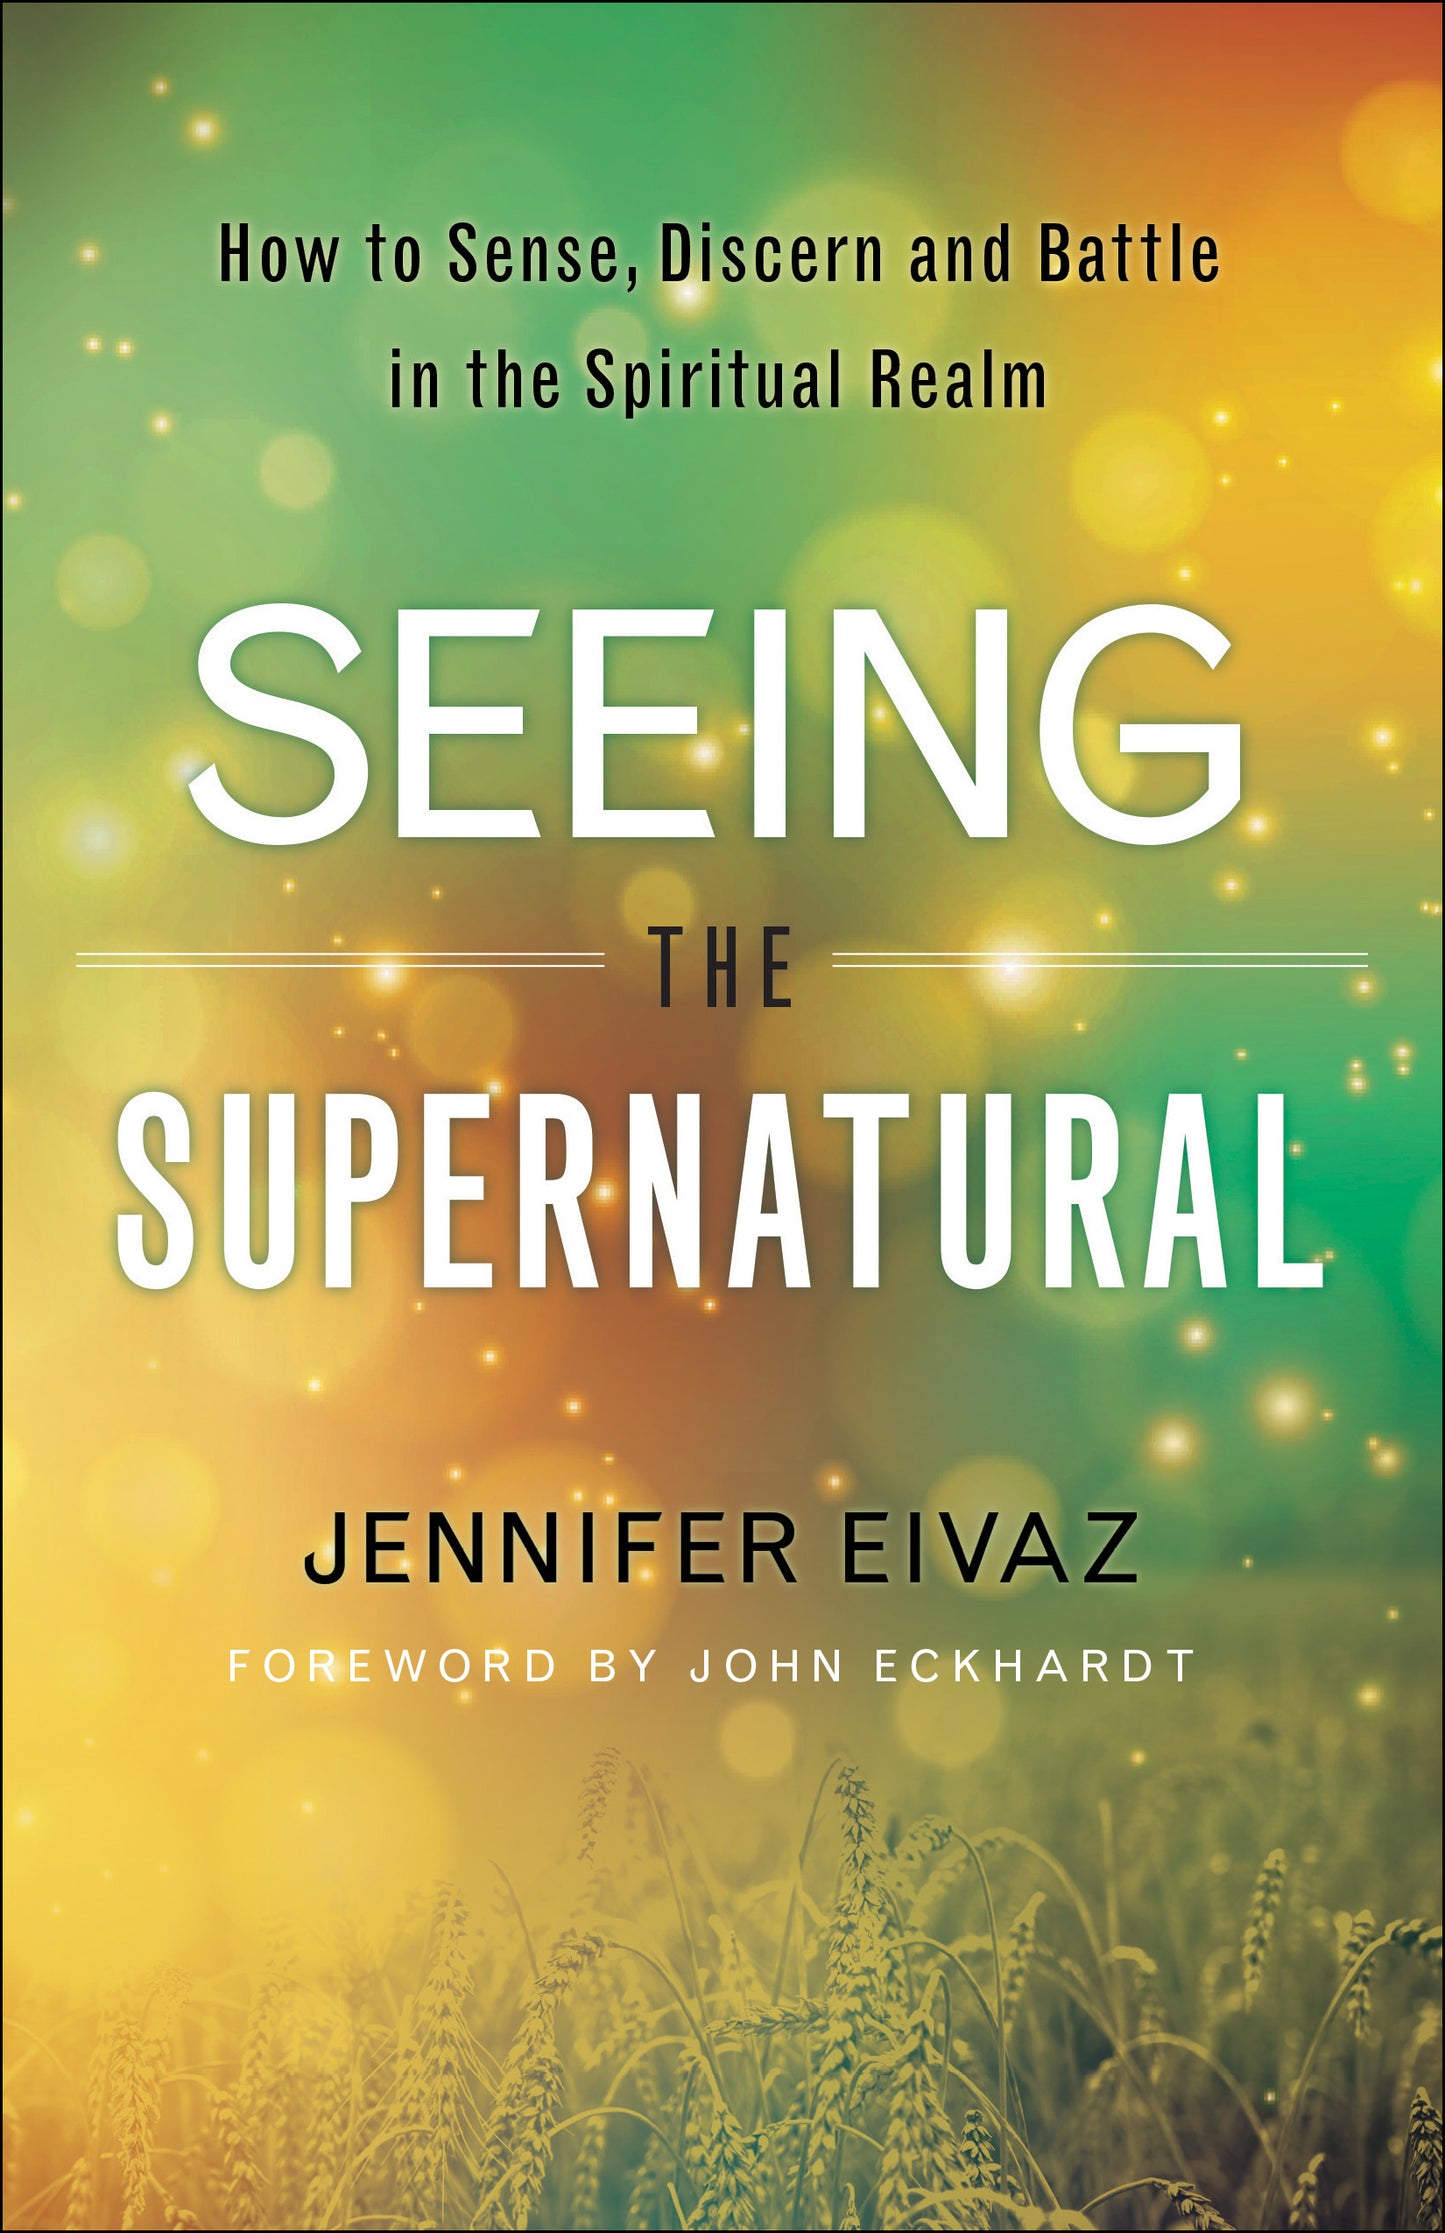 Seeing the Supernatural Book: How to Sense, Discern and Battle in the Spiritual Realm